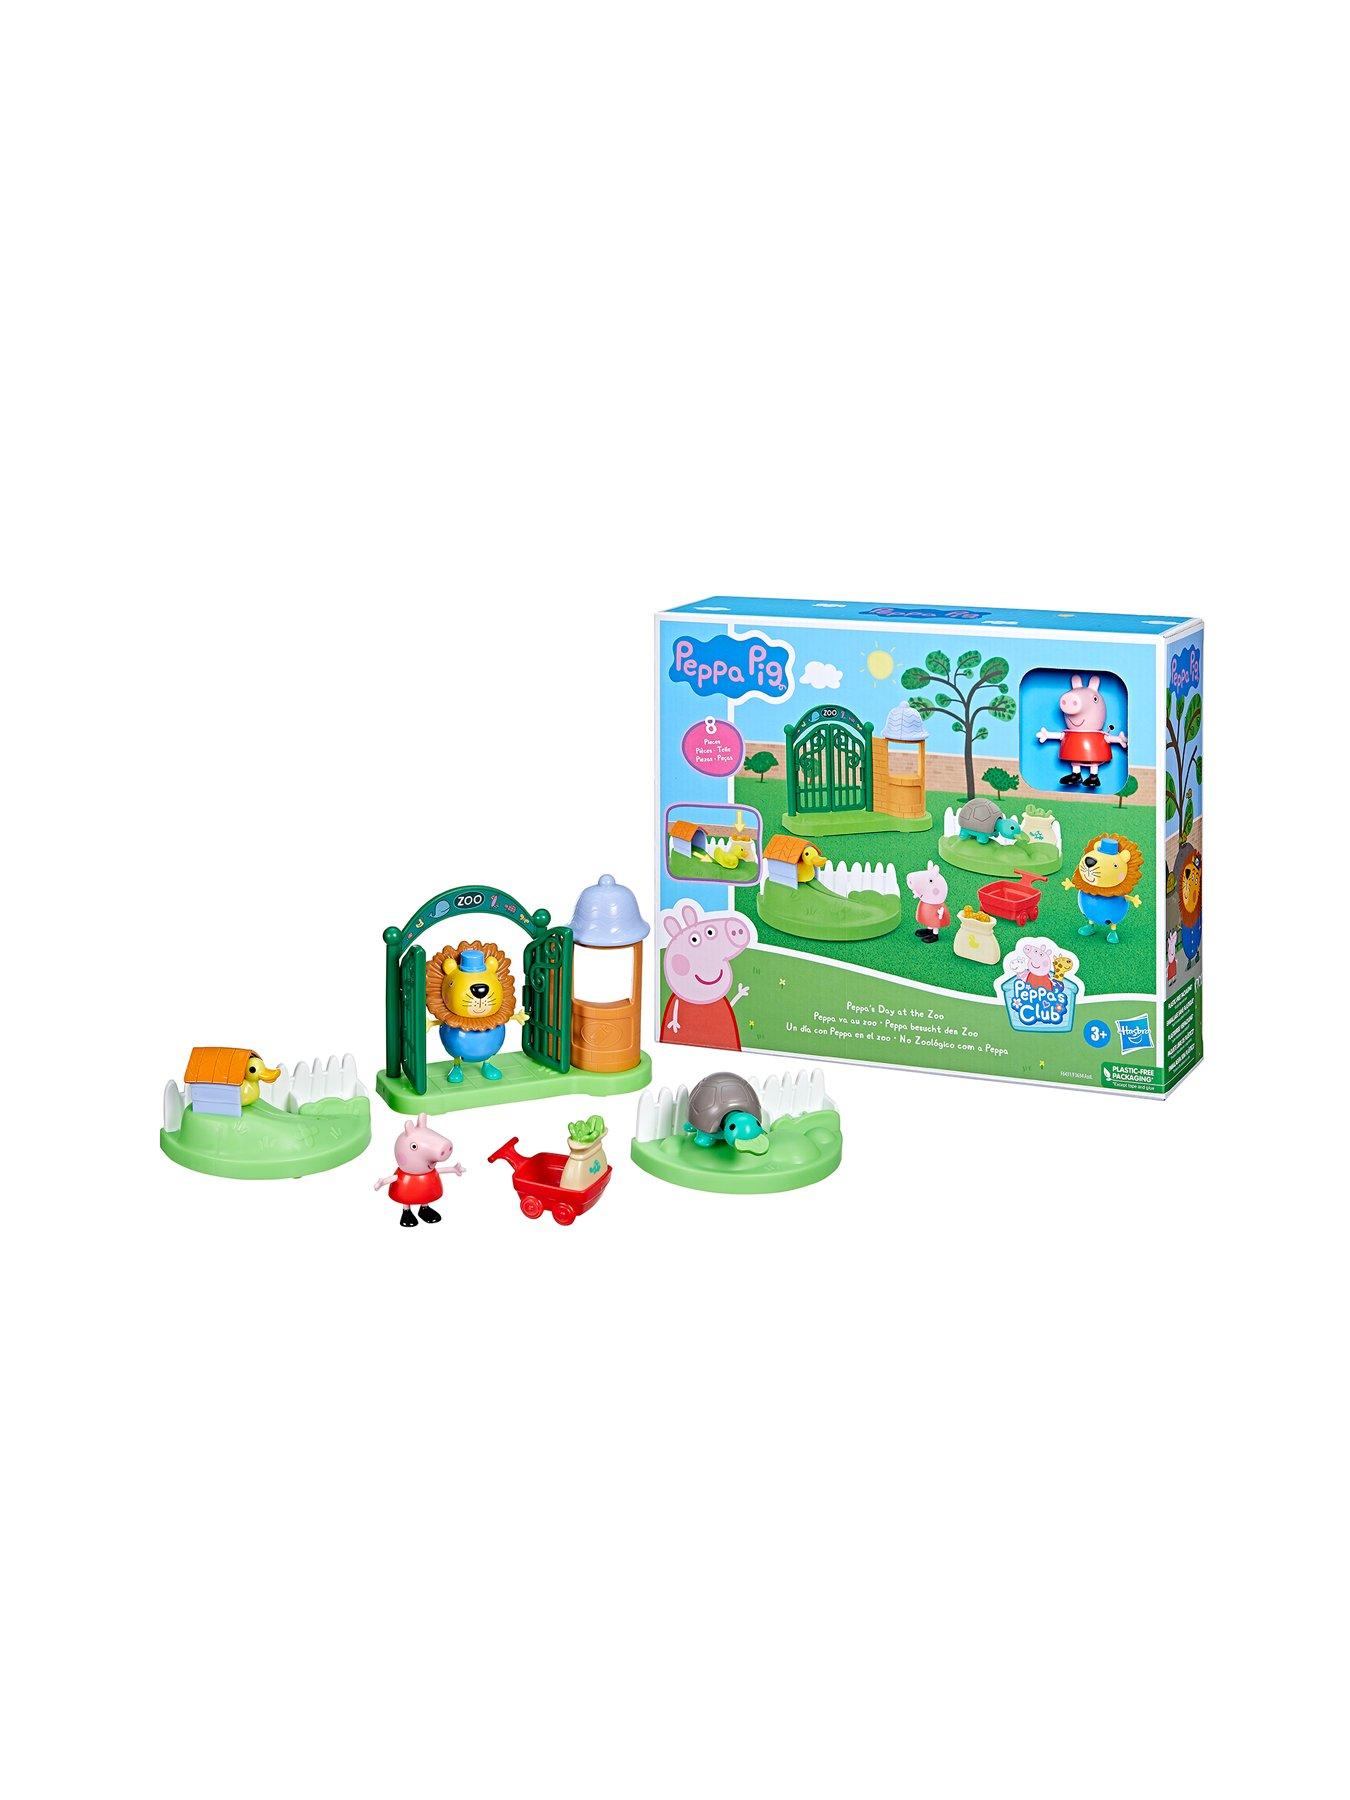  Peppa Pig Peppa's Adventures Grandpa Pig's Cabin Boat Vehicle  Preschool Toy: 1 Figure, Removable Deck, Rolling Wheels, for Ages 3 and Up  : Toys & Games